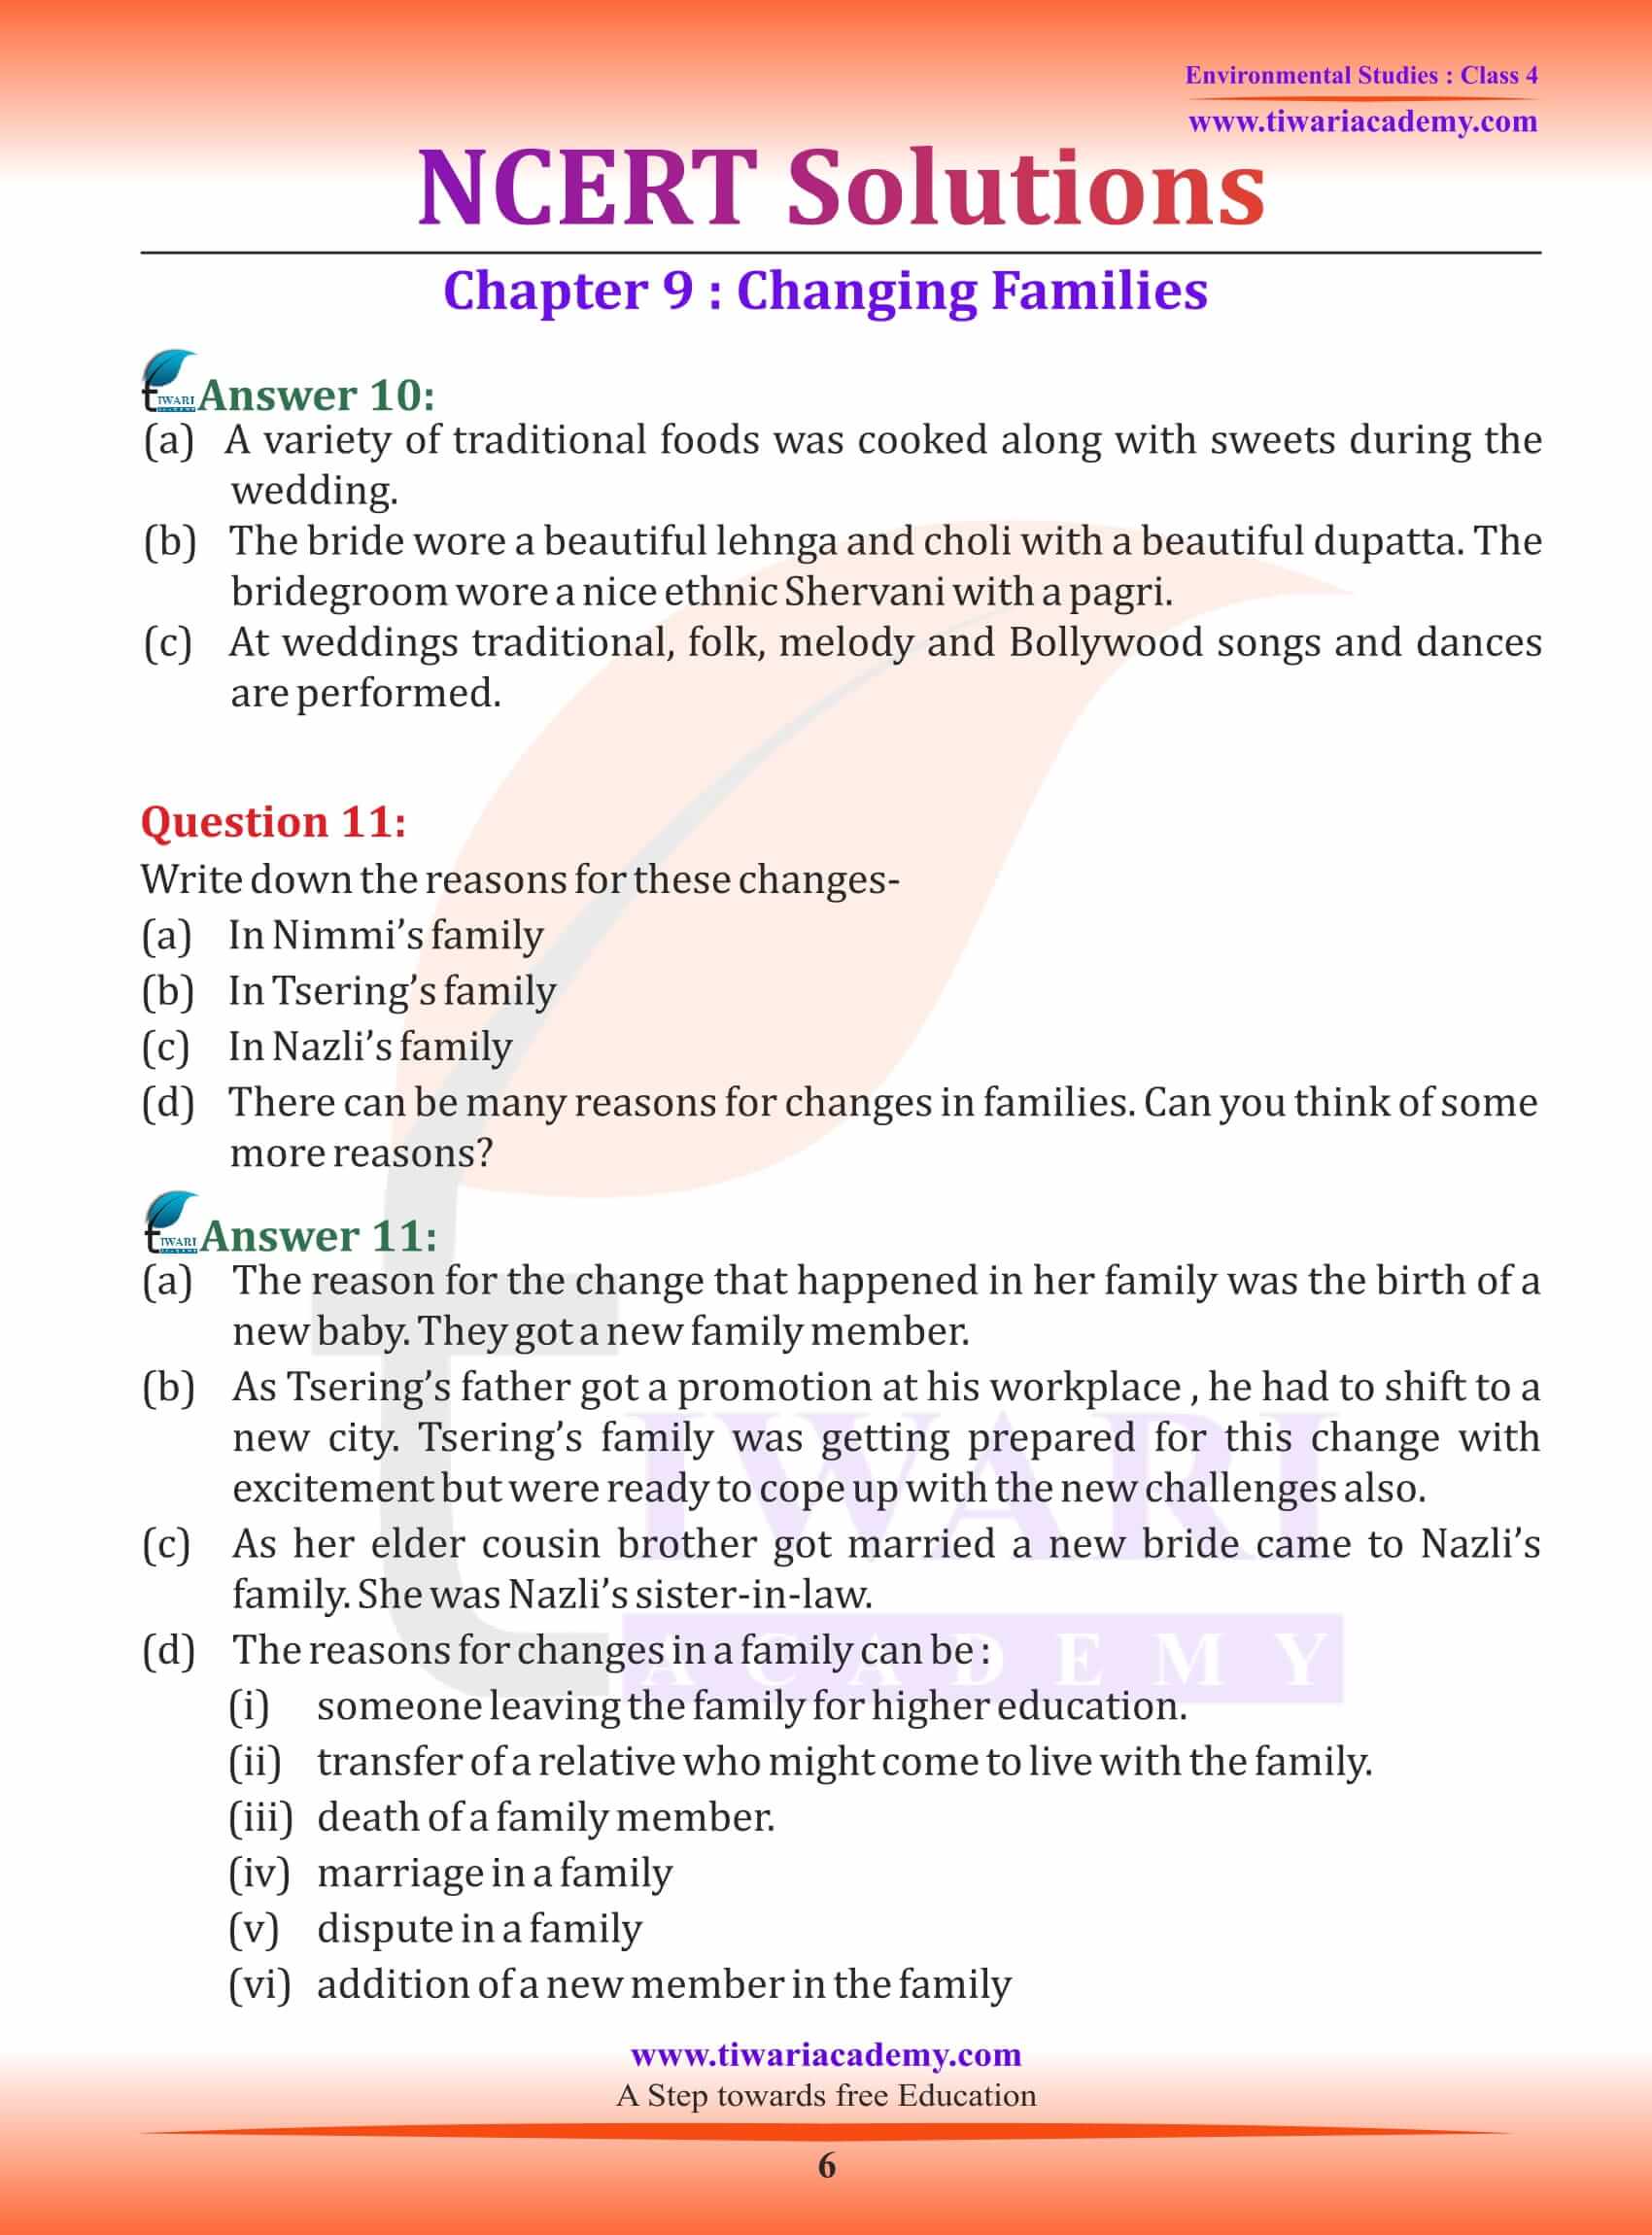 NCERT Solutions for Class 4 EVS Chapter 9 question answer